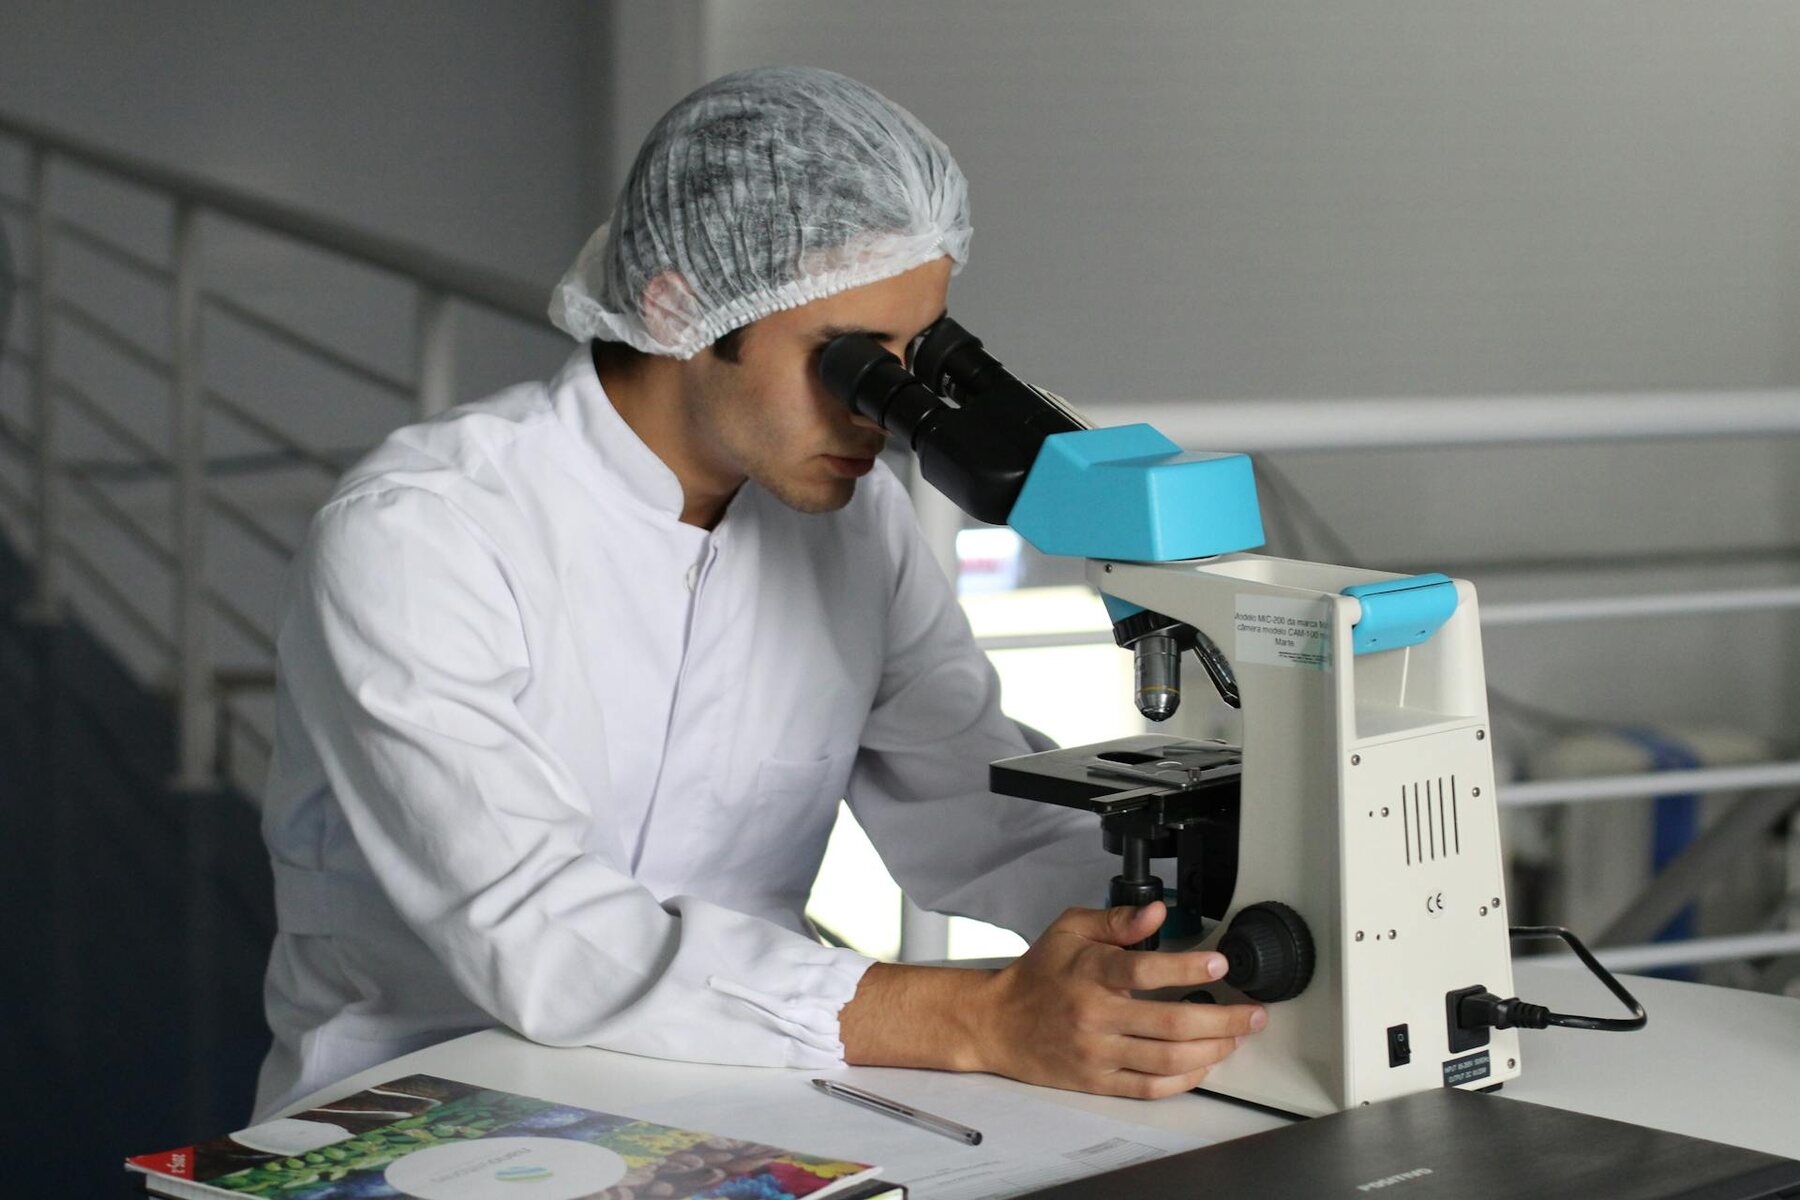 A scientist in a white lab coat examining a specimen under a microscope